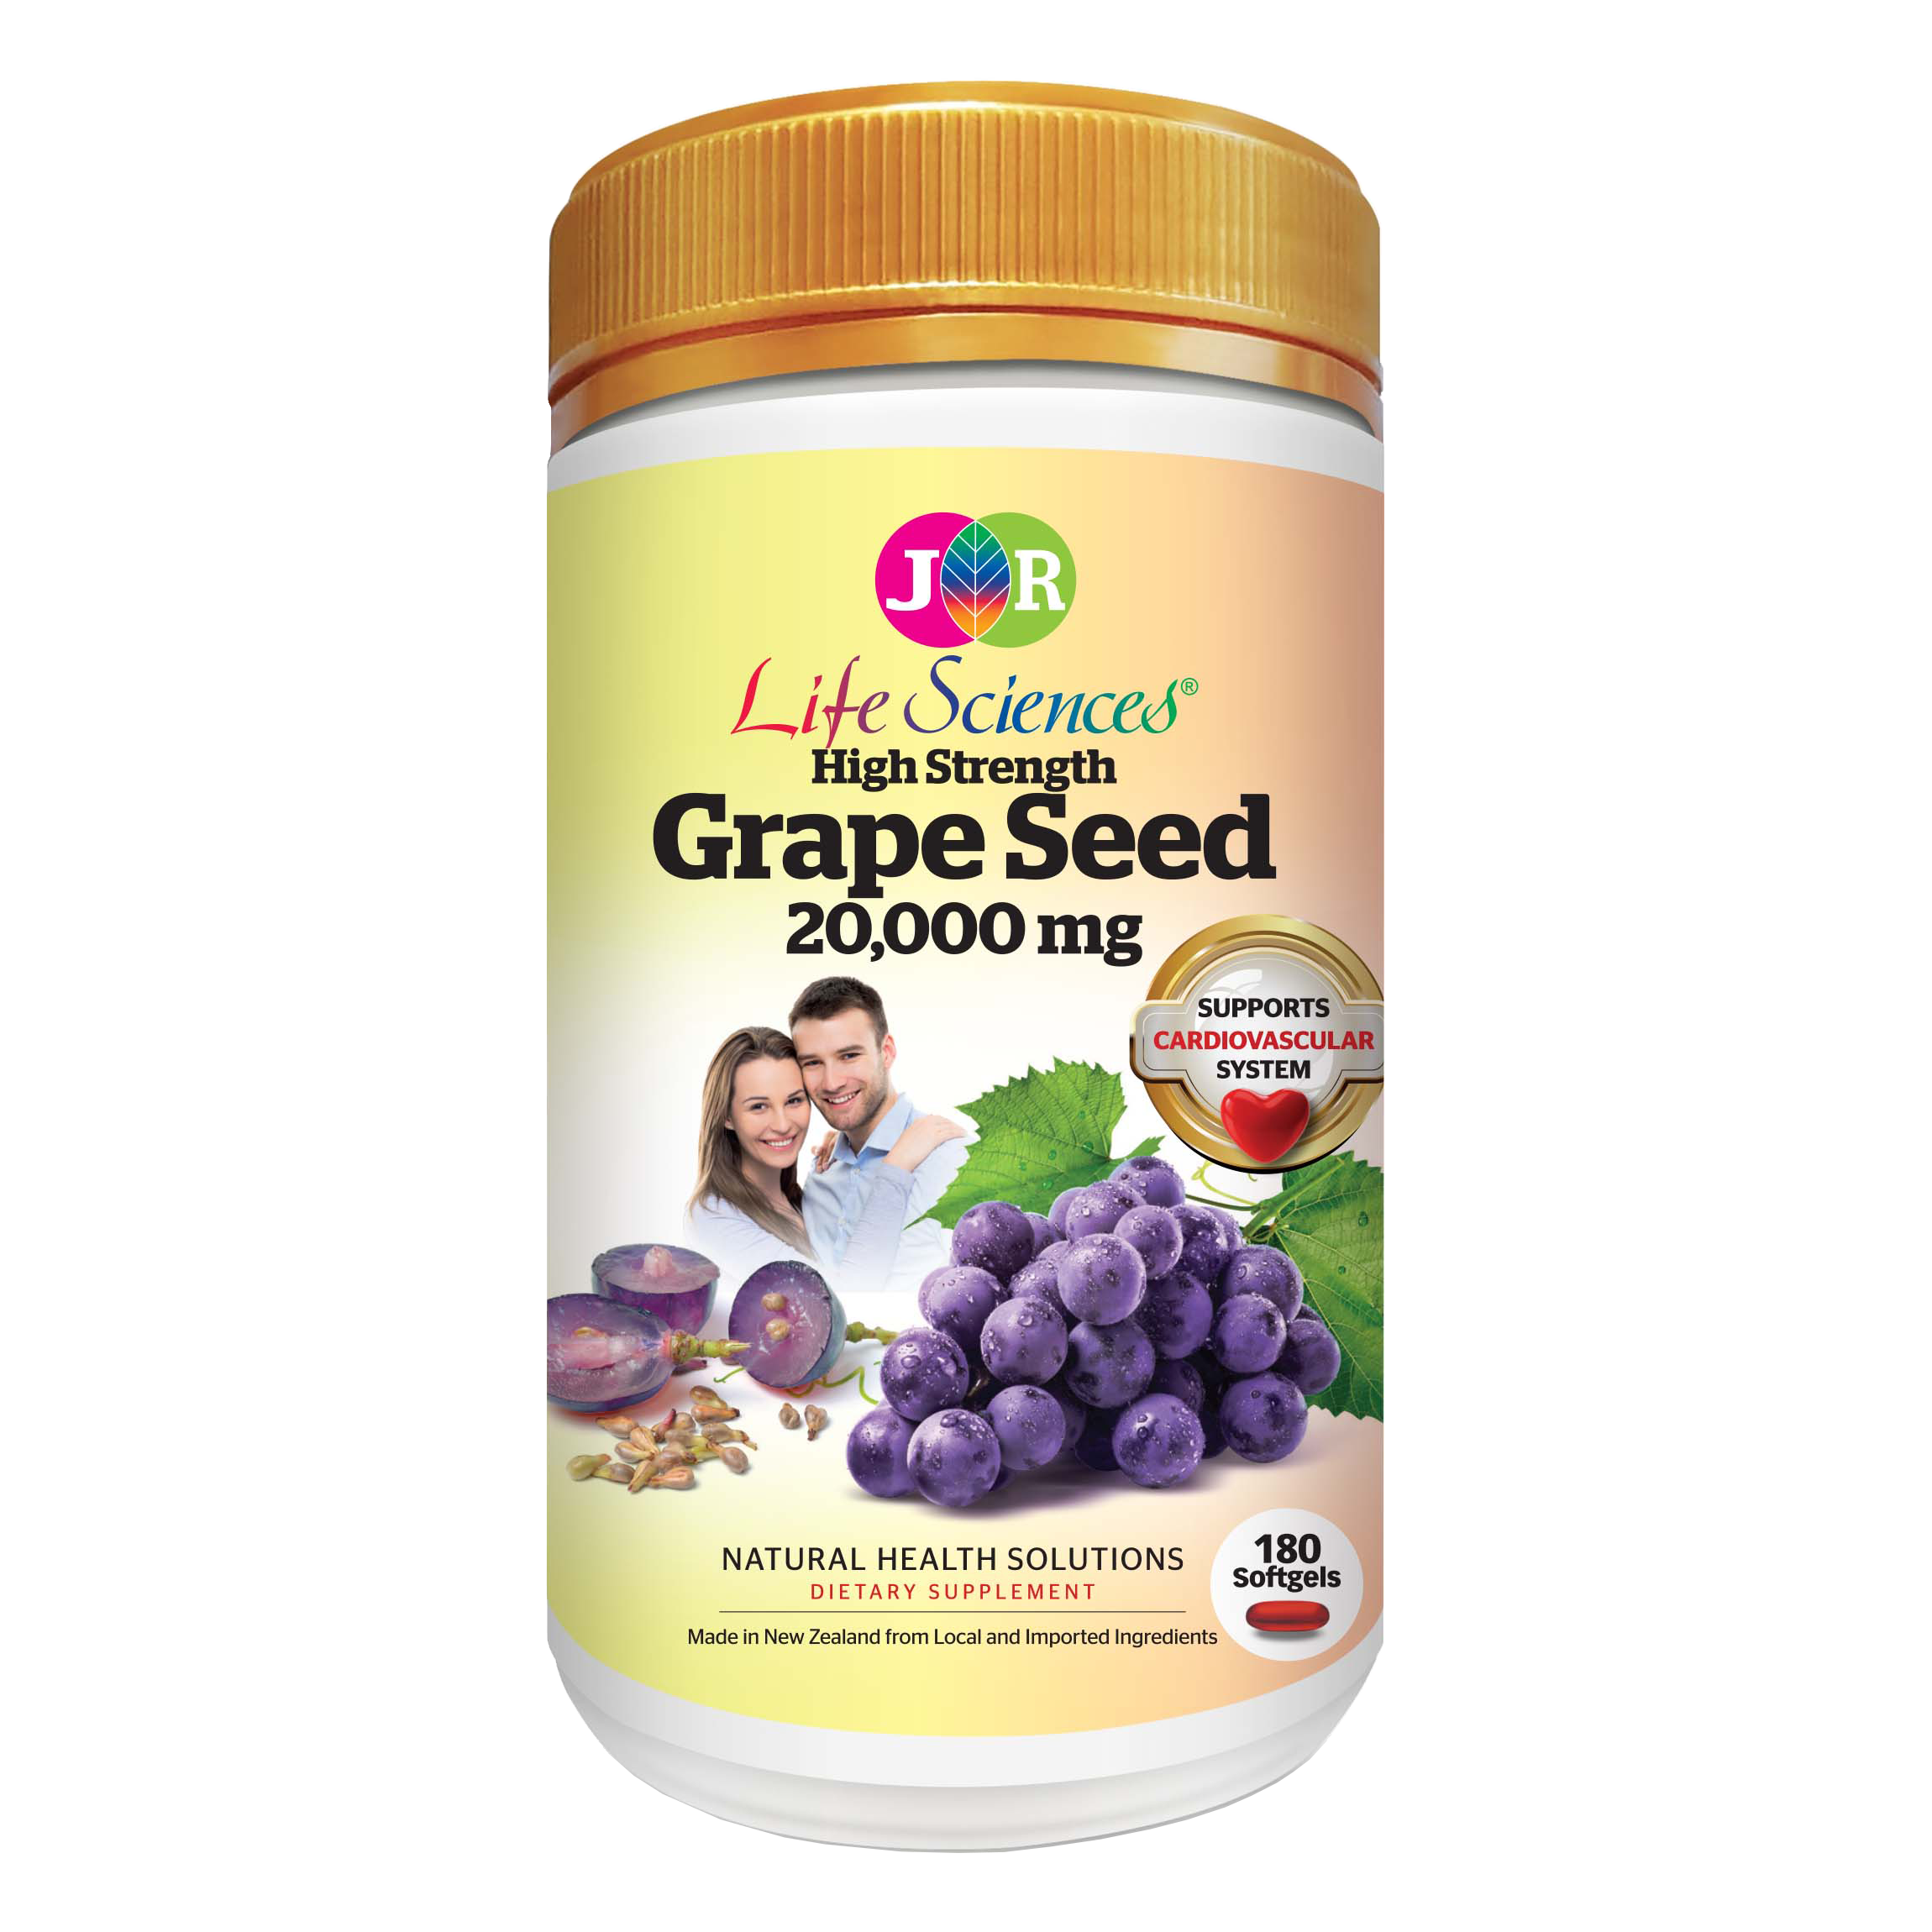 JR Life Sciences High Strength Grape Seed 20,000mg (From Fresh Grape Seed) (180 Softgels)